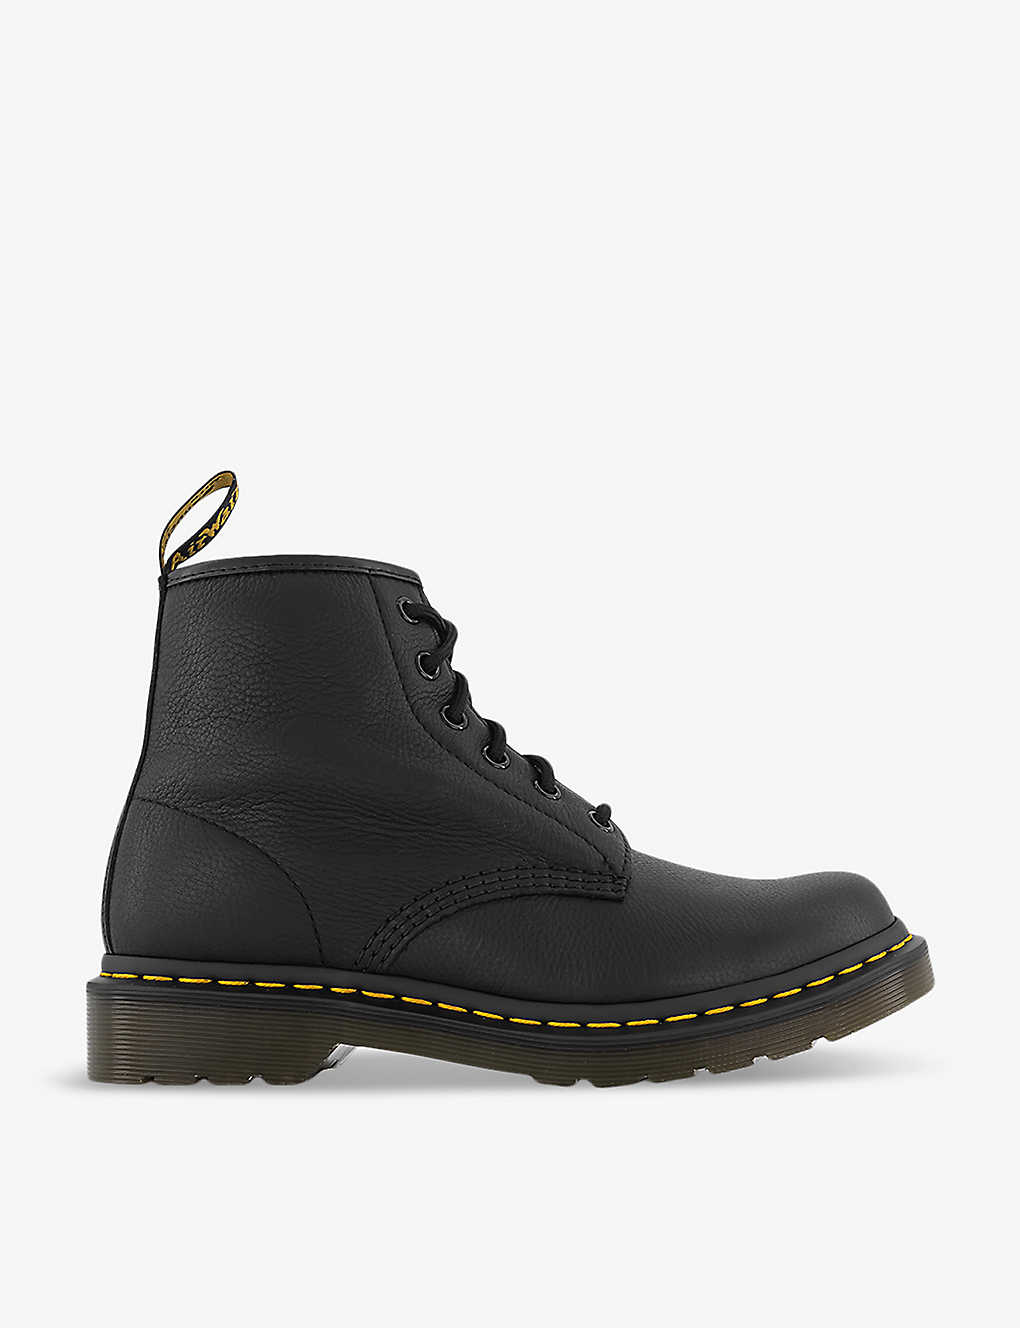 Dr. Martens' Dr. Martens Womens Black Virginia 101 Six-eyelet Leather Ankle Boots